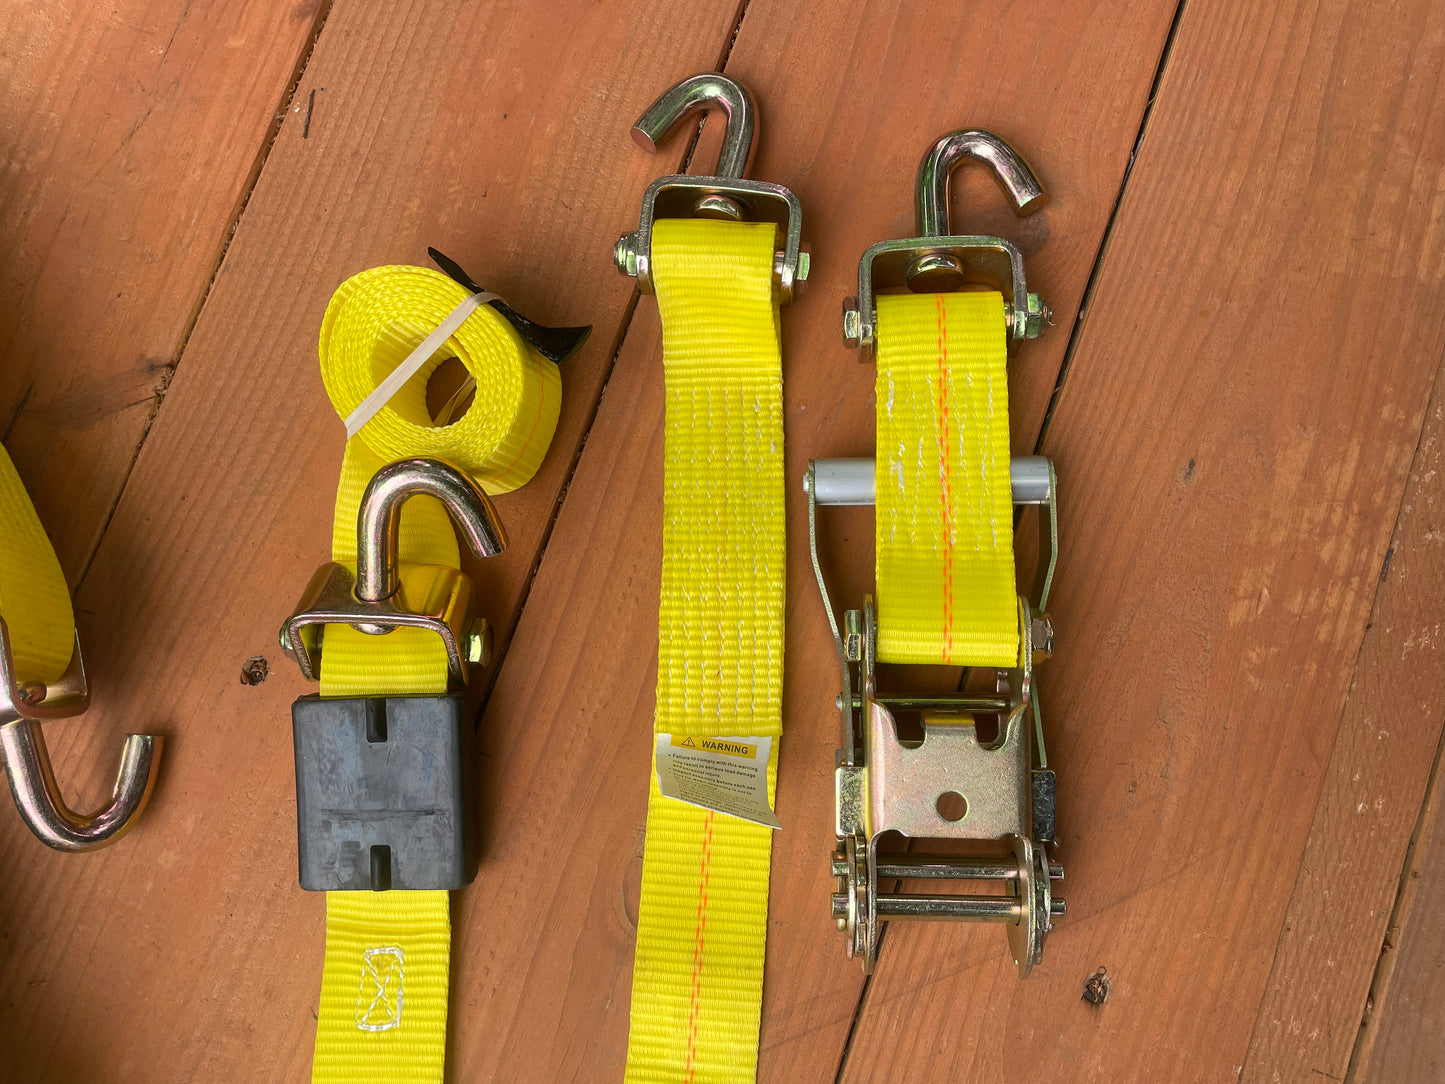 4 Pack Swivel J Ratchet straps with Free Shipping!